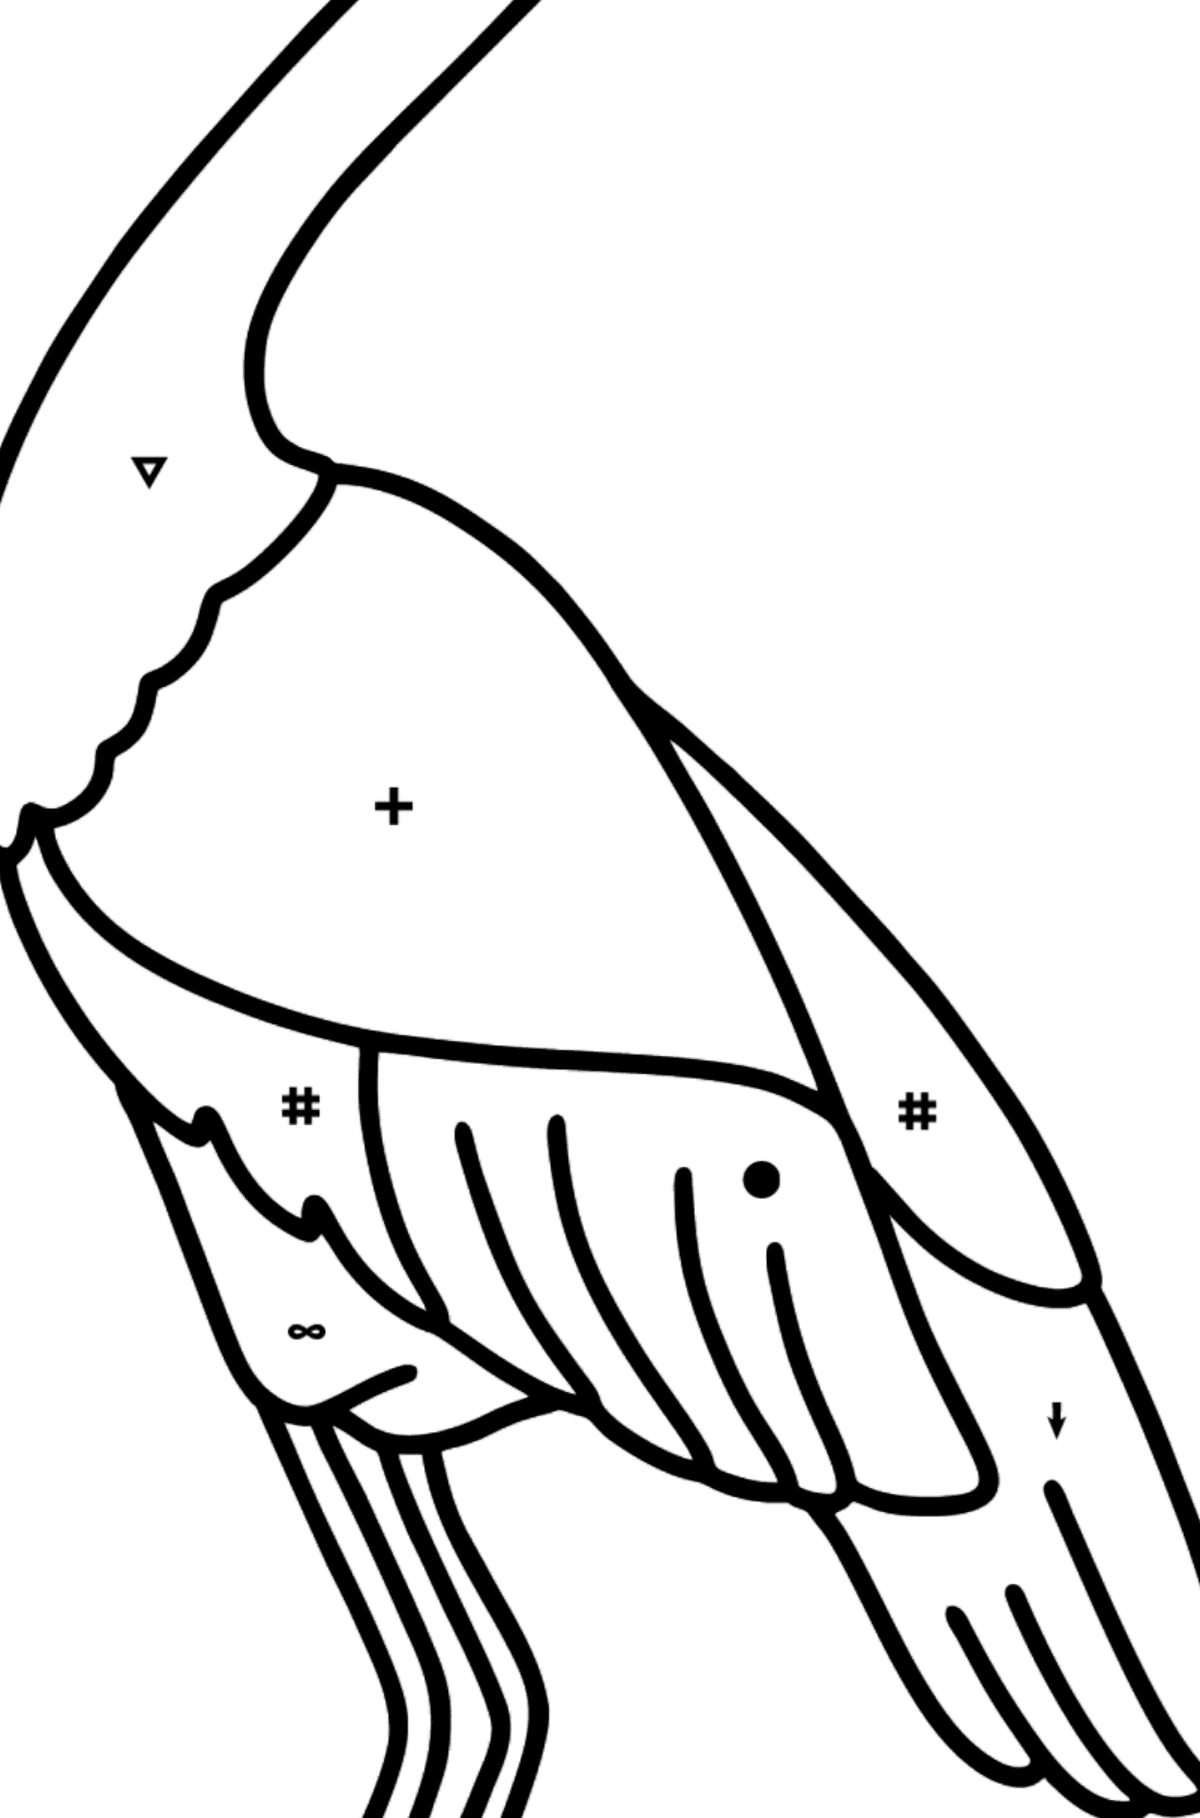 Stork coloring page - Coloring by Symbols for Kids